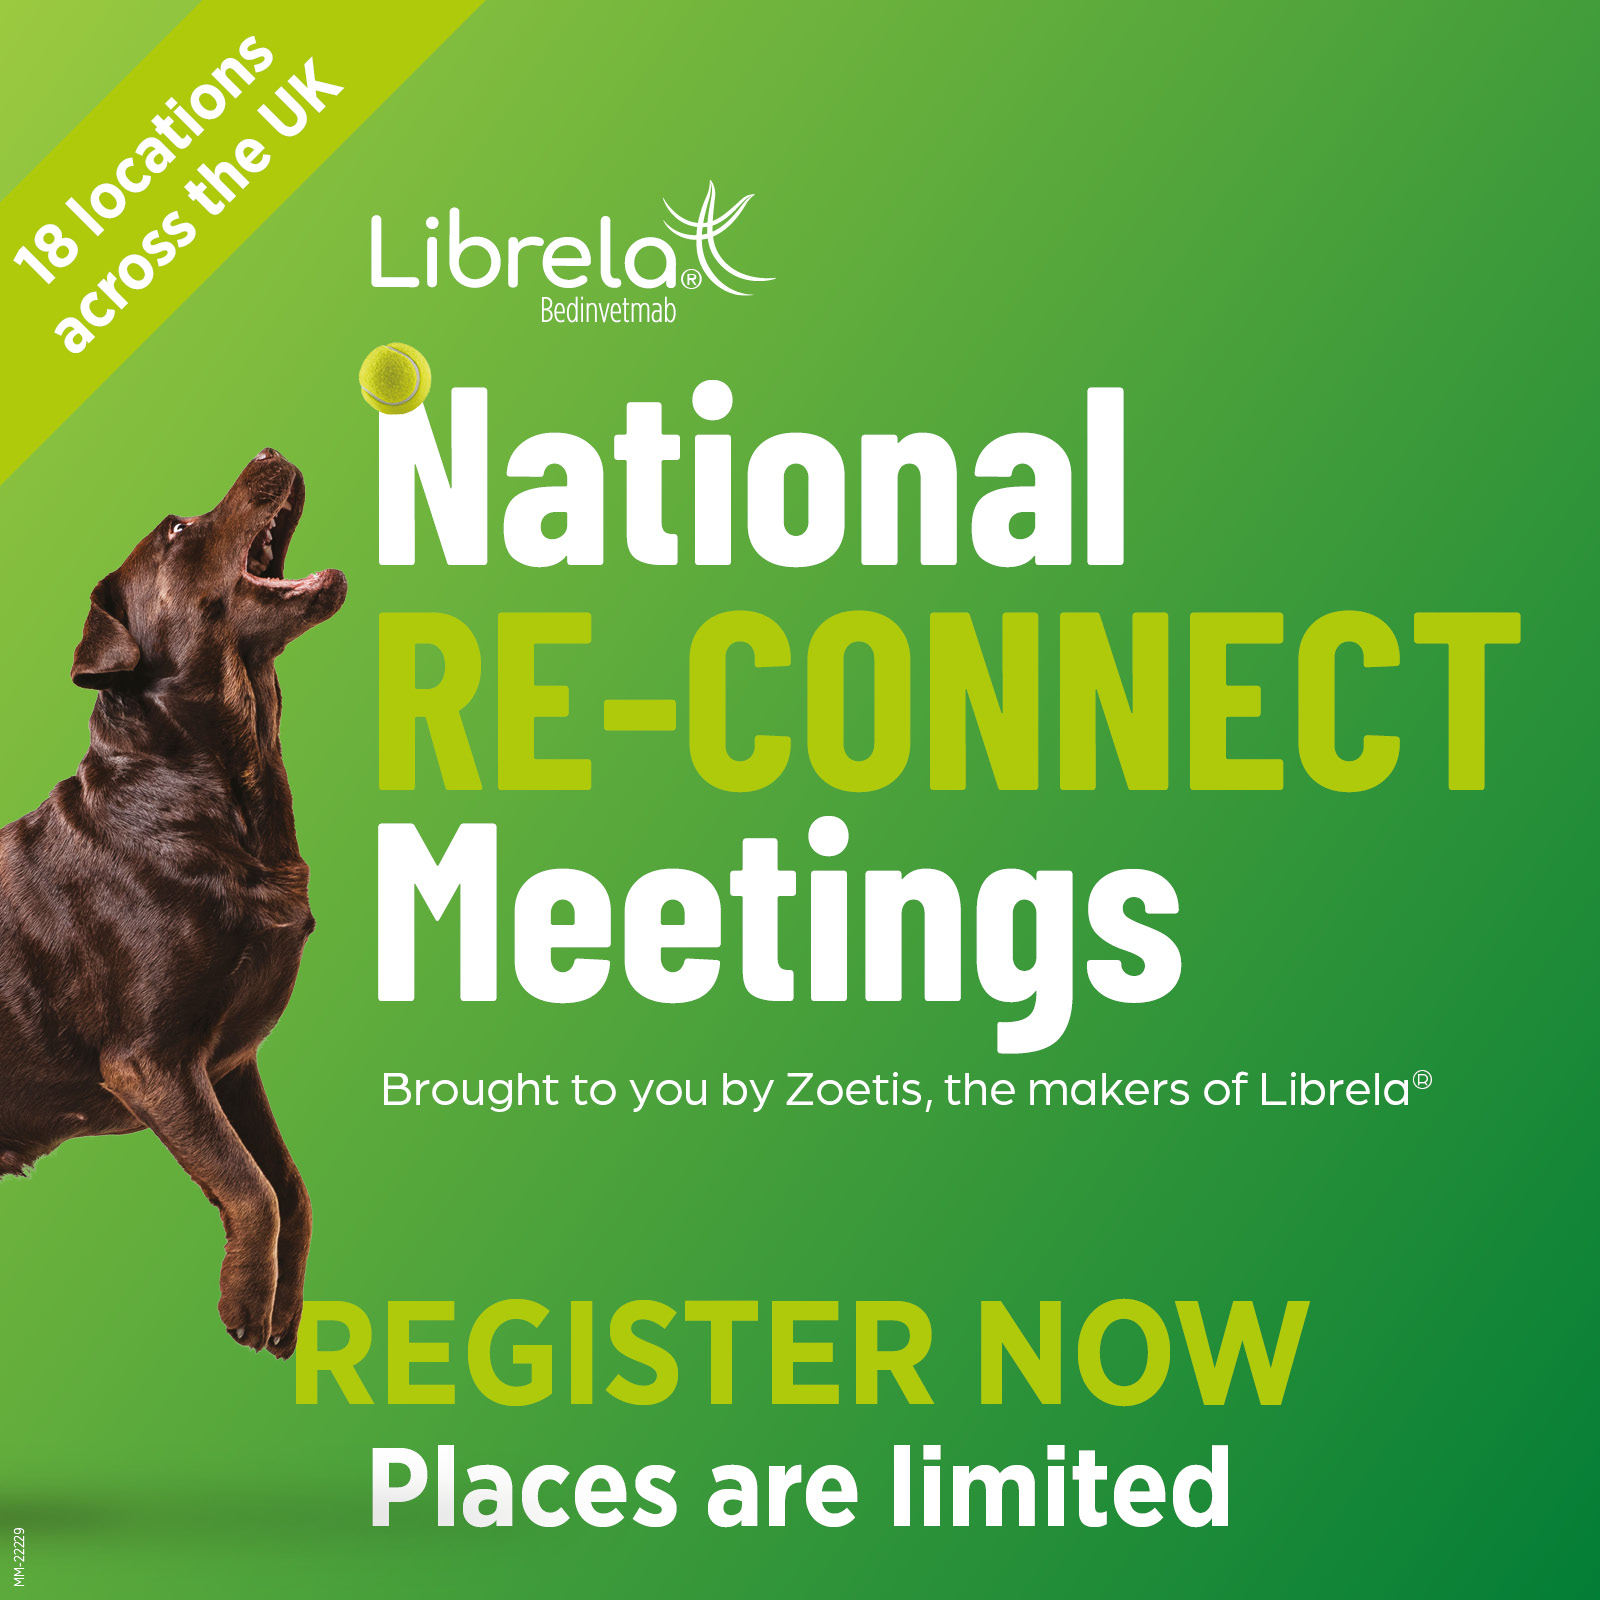 Zoetis invites vets and nurses to Librela Re-Connect meetings